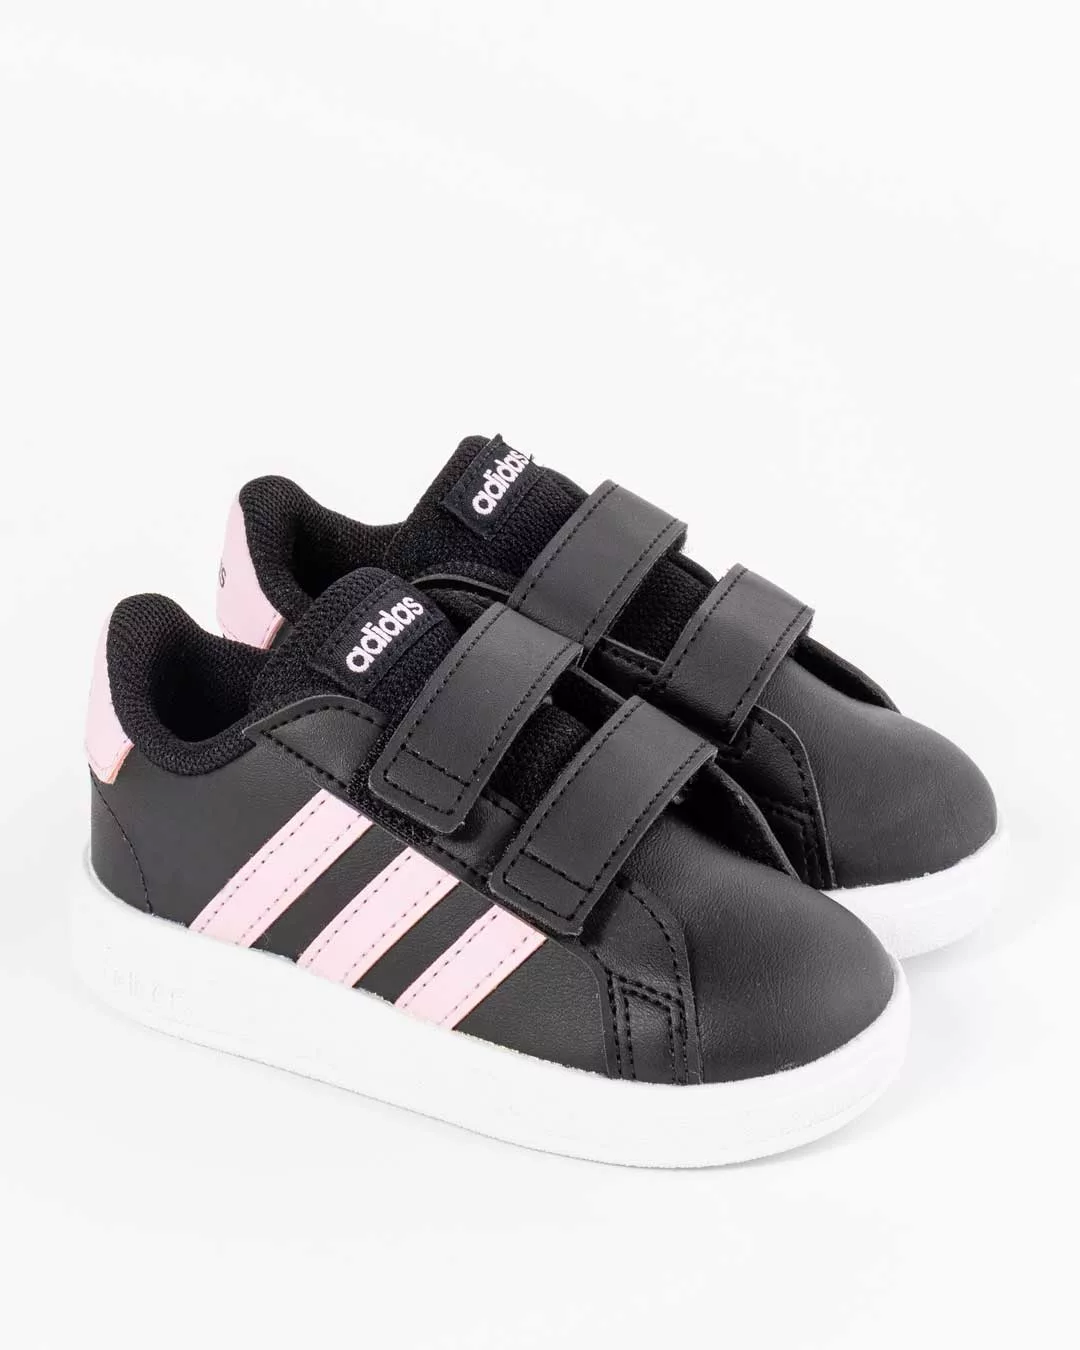 angled side profile of adidas black sneakers with three pink stripes on upper, featuring the adidas logo in pink on tongue ,pink heel counter with adidas logo in black